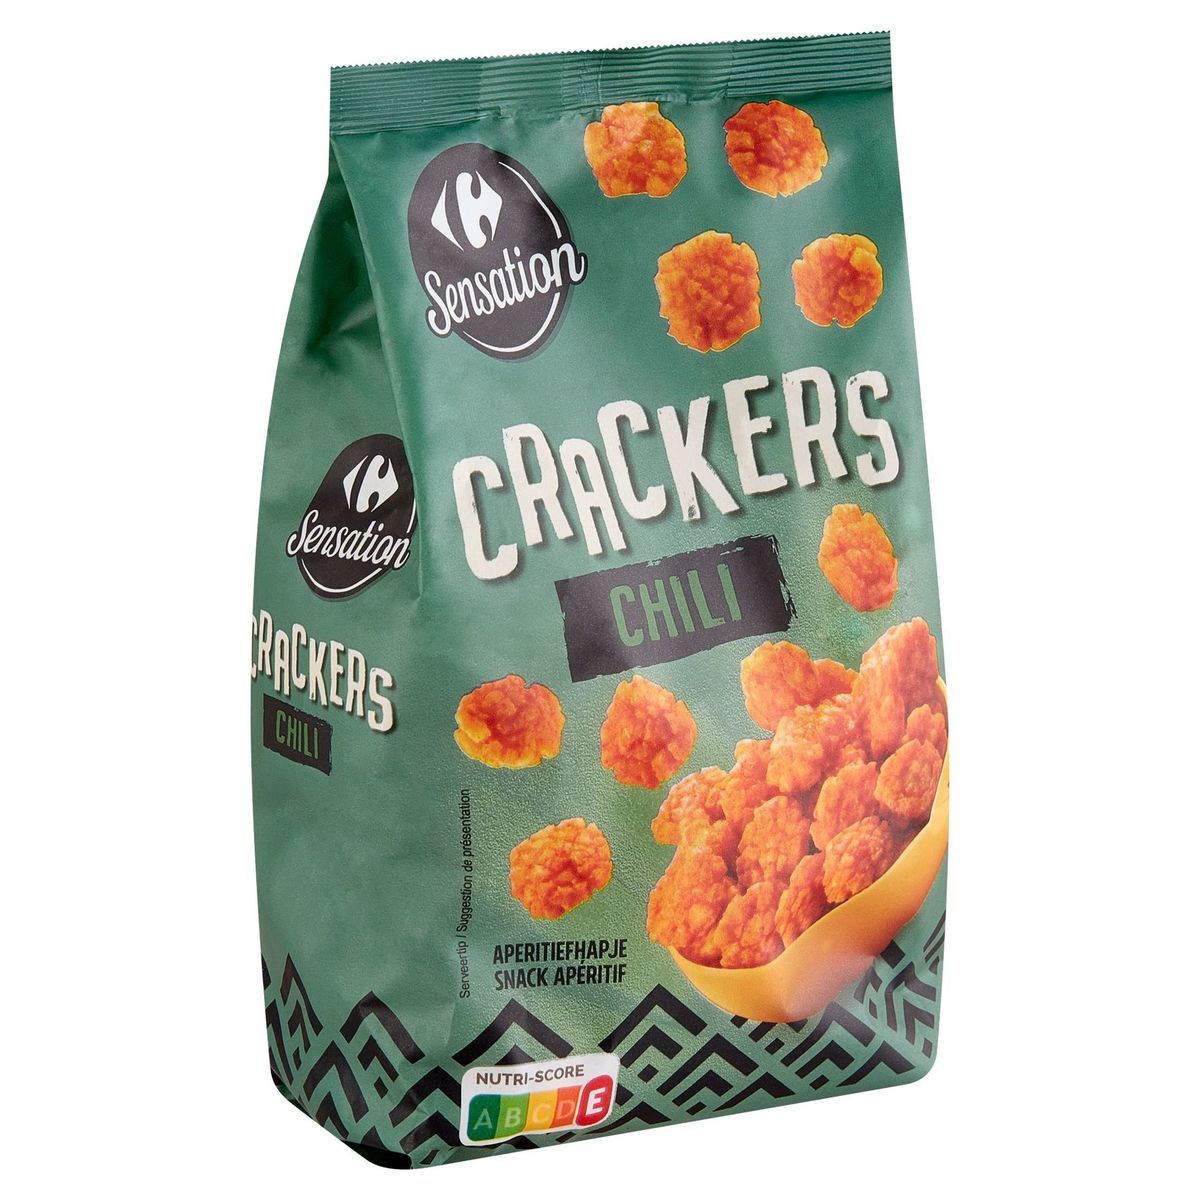 Carrefour Aperitiefhapje Chili Crackers 150 g